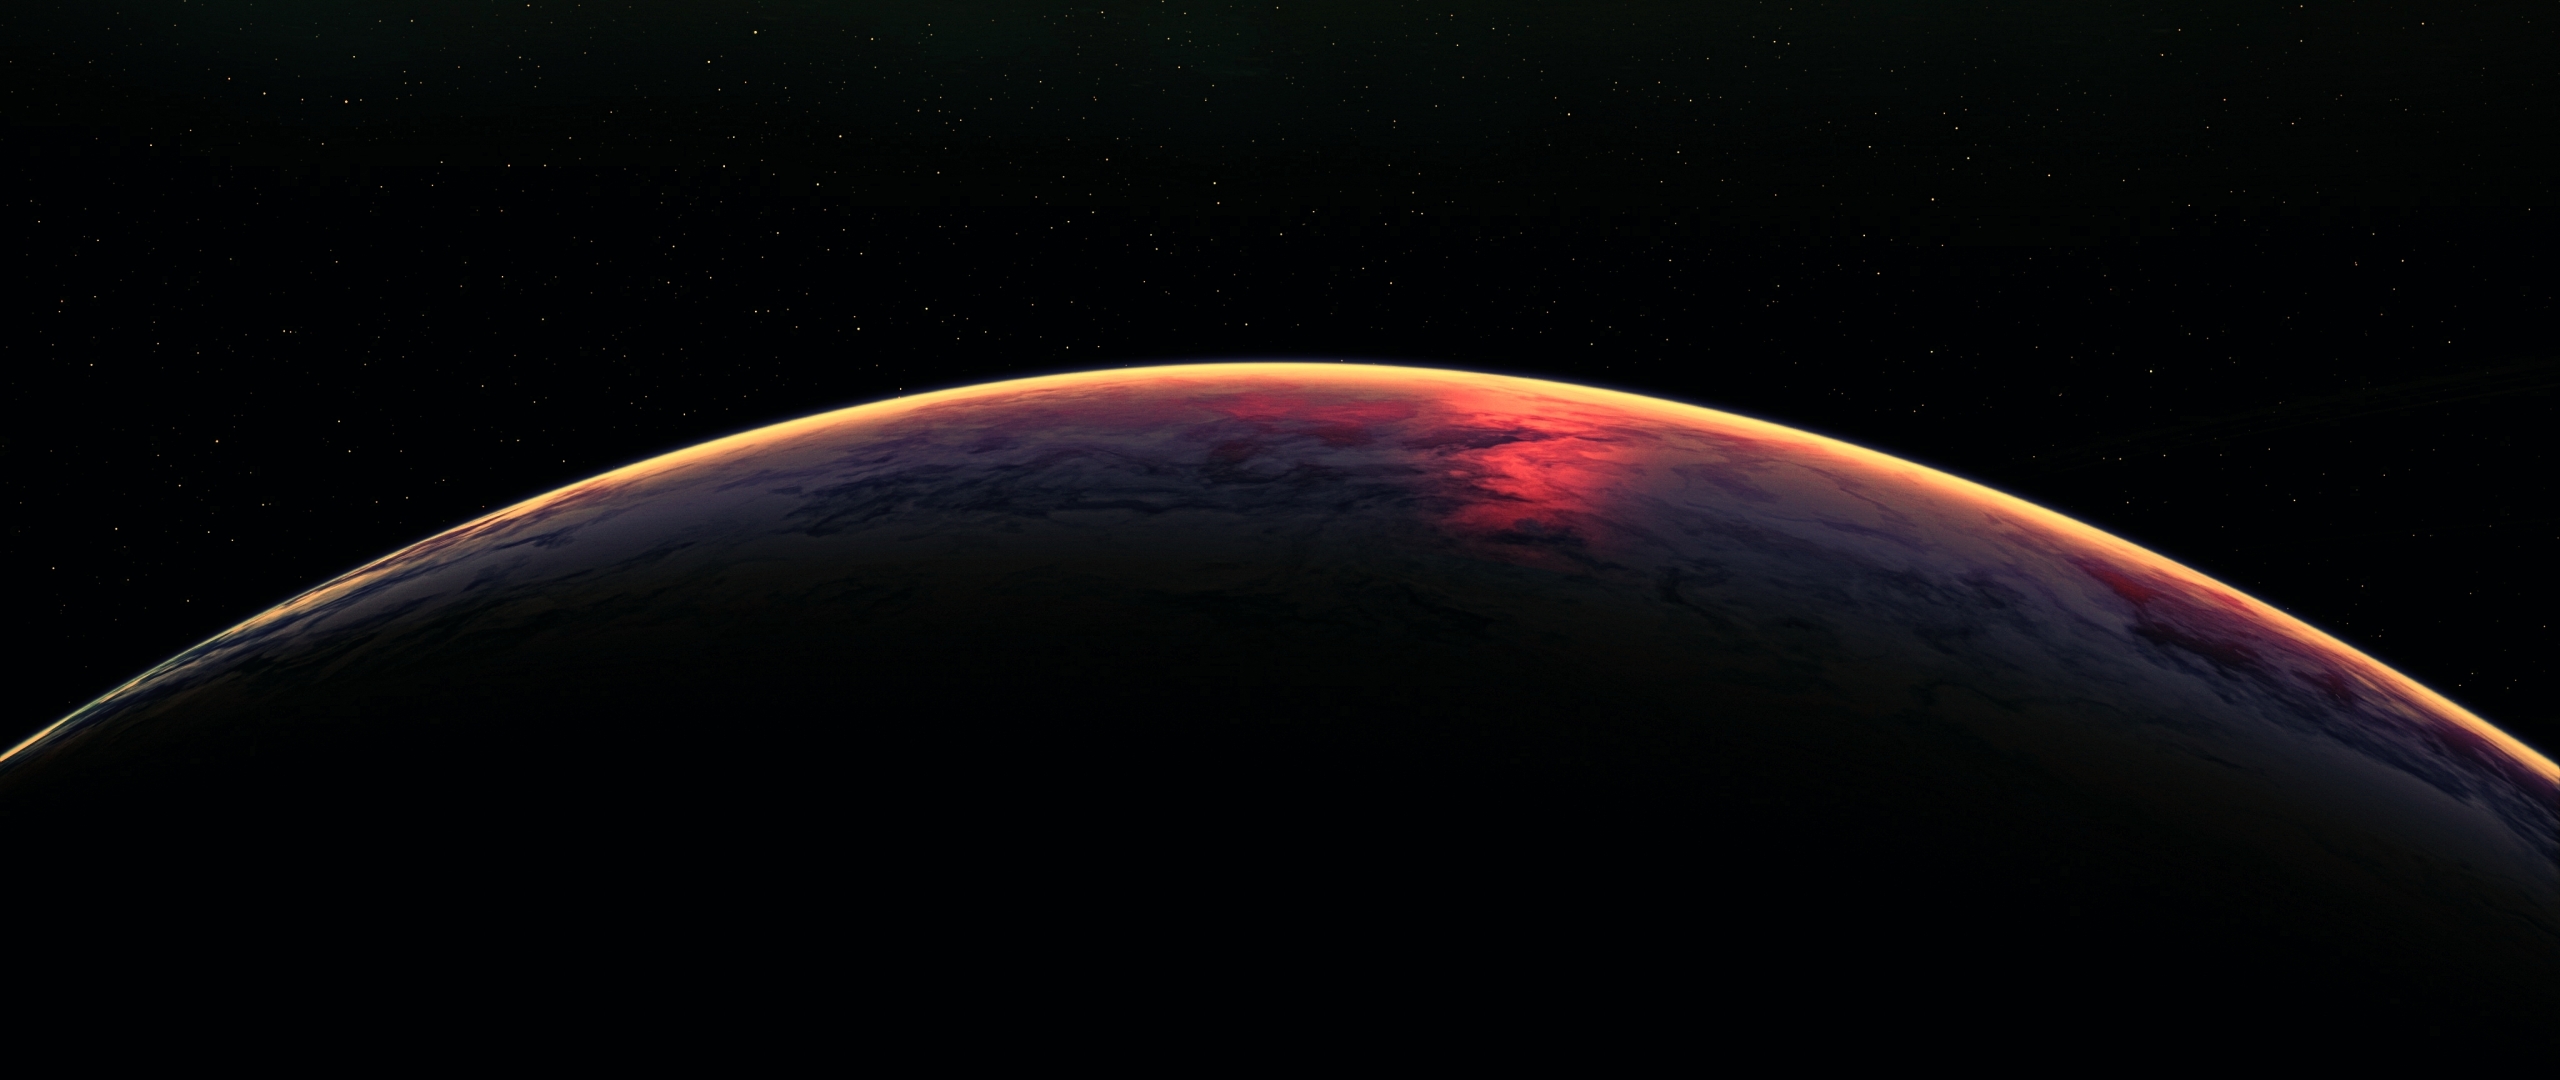 Earth Atmosphere From Space 2560x1080 Resolution Wallpaper, HD Artist 4K Wallpaper, Image, Photo and Background